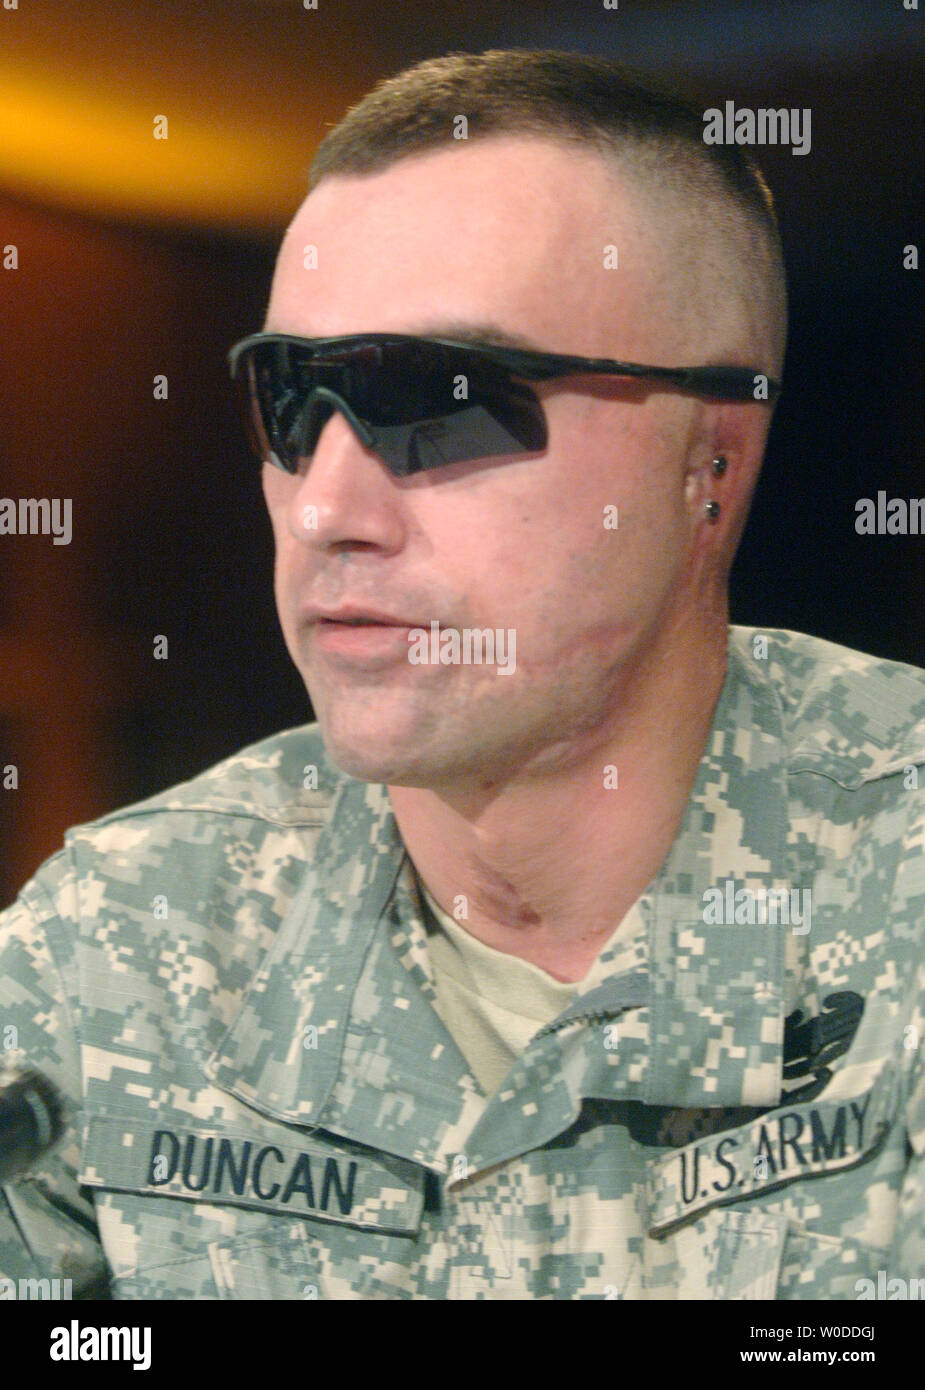 Army Specialist Jeremy Duncan, who lost his ear in combat operations in Iraq and received treatment at the Walter Reed Army Medical Center, testifies to a House Oversight and Government Reform Committee Hearing on the care and conditions of wounded soldiers at Walter Reed, in Washington at the Walter Reed Army Medical Center on March 5, 2007. (UPI Photo/Kevin Dietsch) Stock Photo